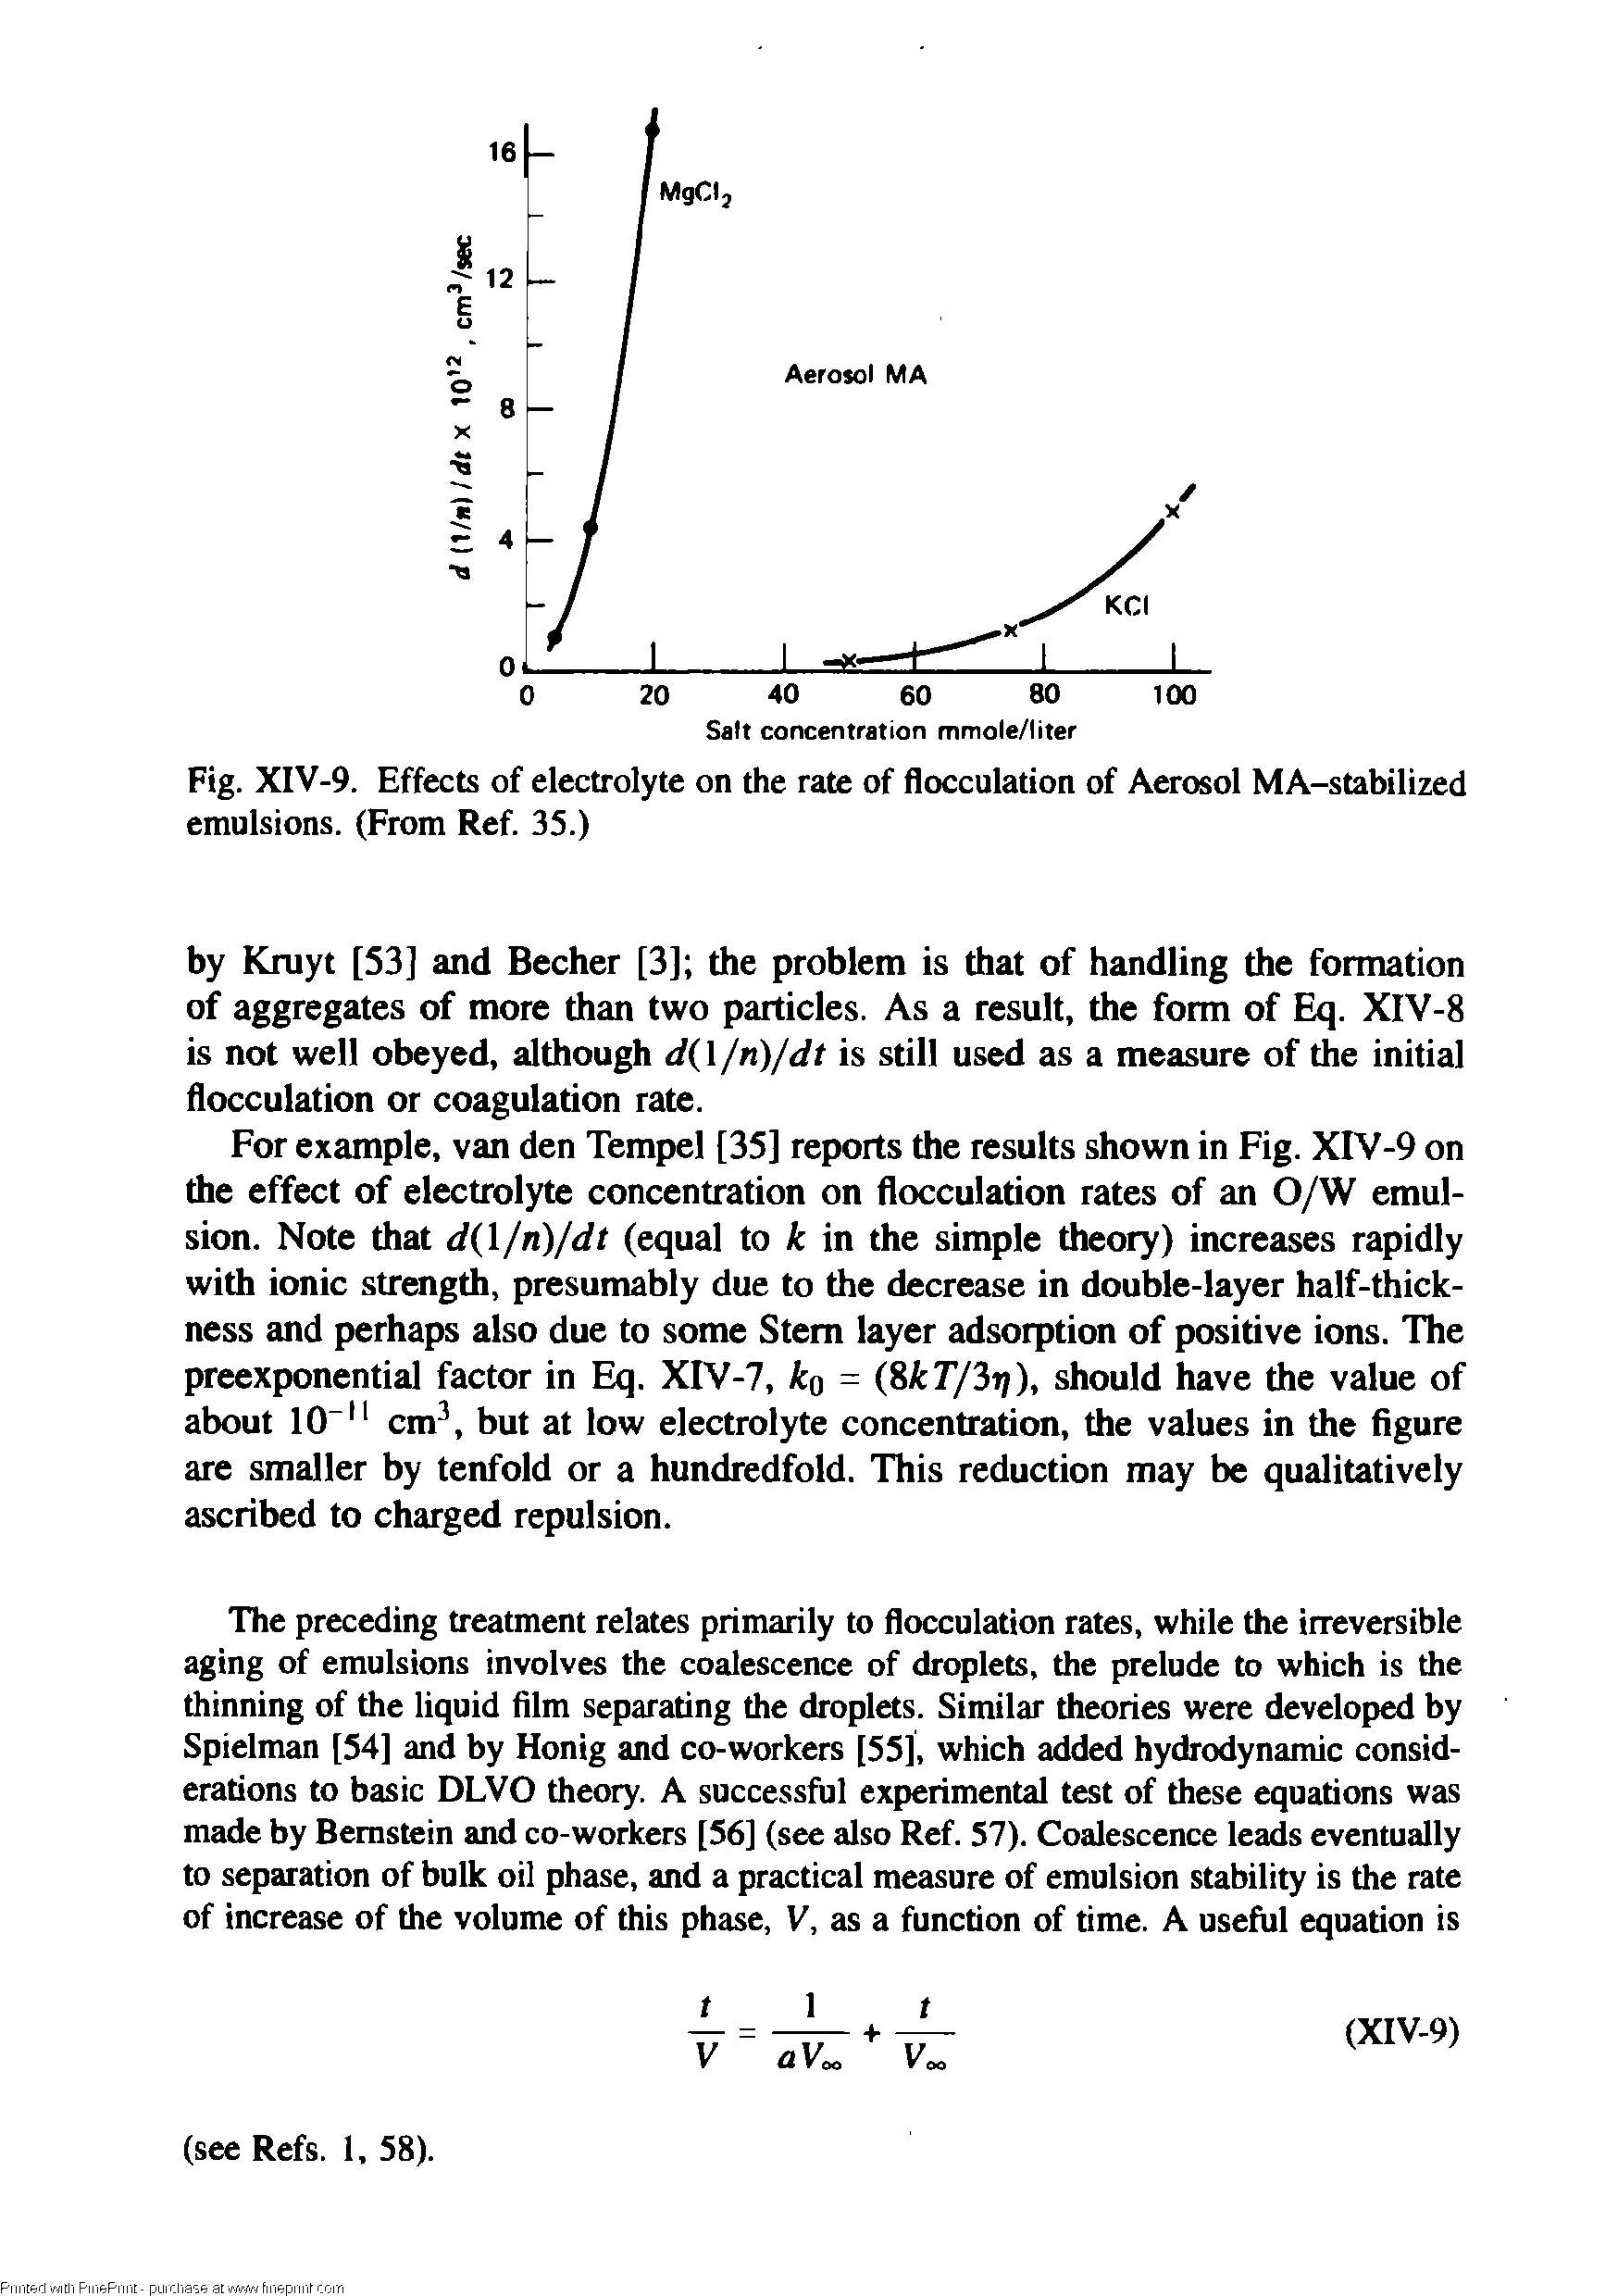 Fig. XIV-9. Effects of electrolyte on the rate of flocculation of Aerosol MA-stabilized emulsions. (From Ref. 35.)...